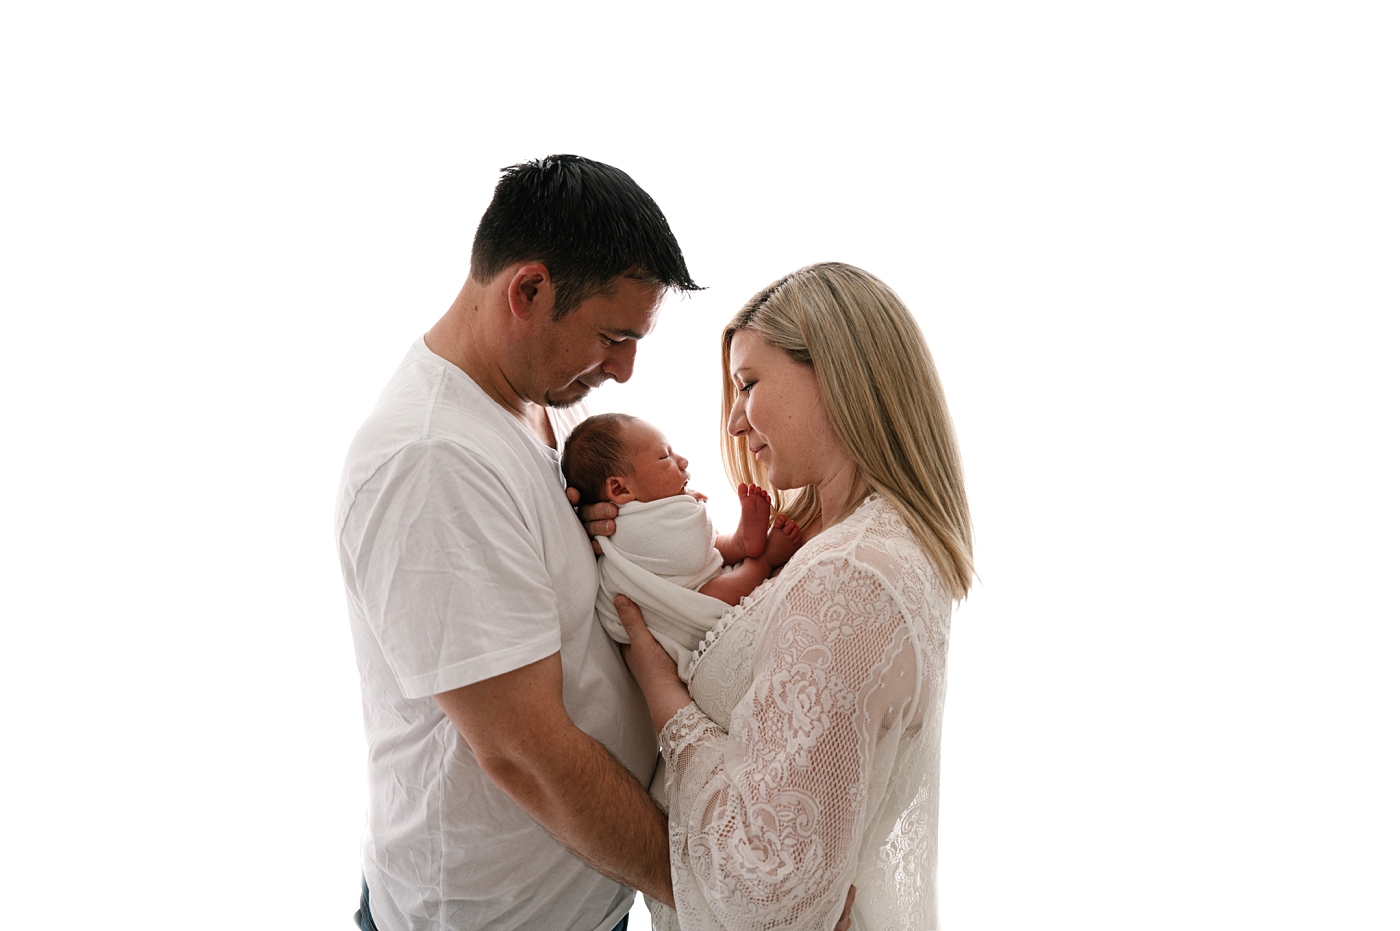 New parents hold child between them during newborn session. Photo by Meg Newton Photography.